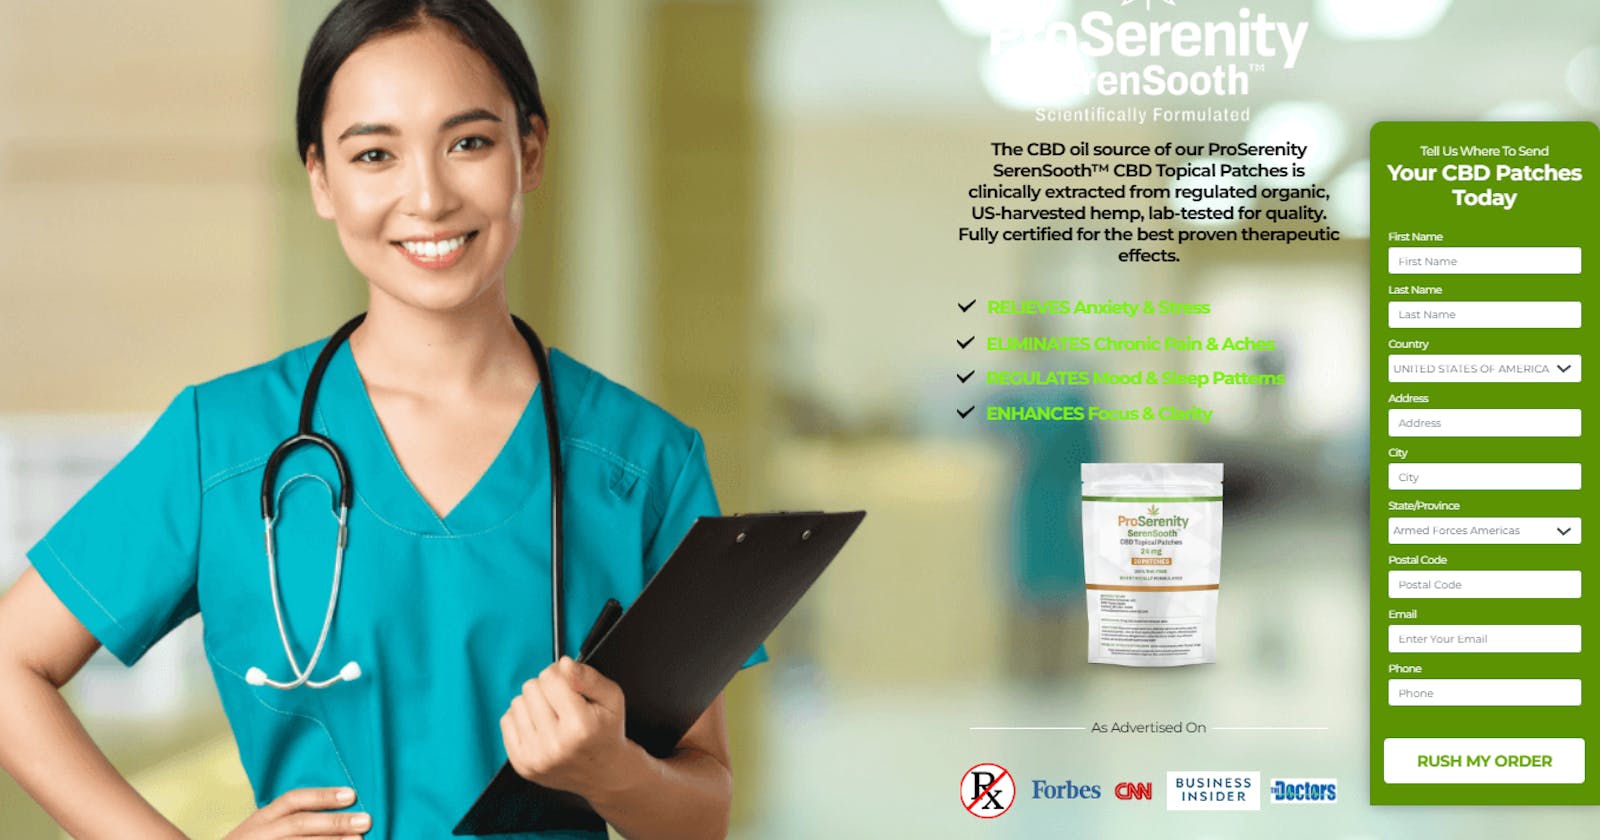 ProSerenity SerenSooth CBD Topical Patches : Does It Work? What to Expect!